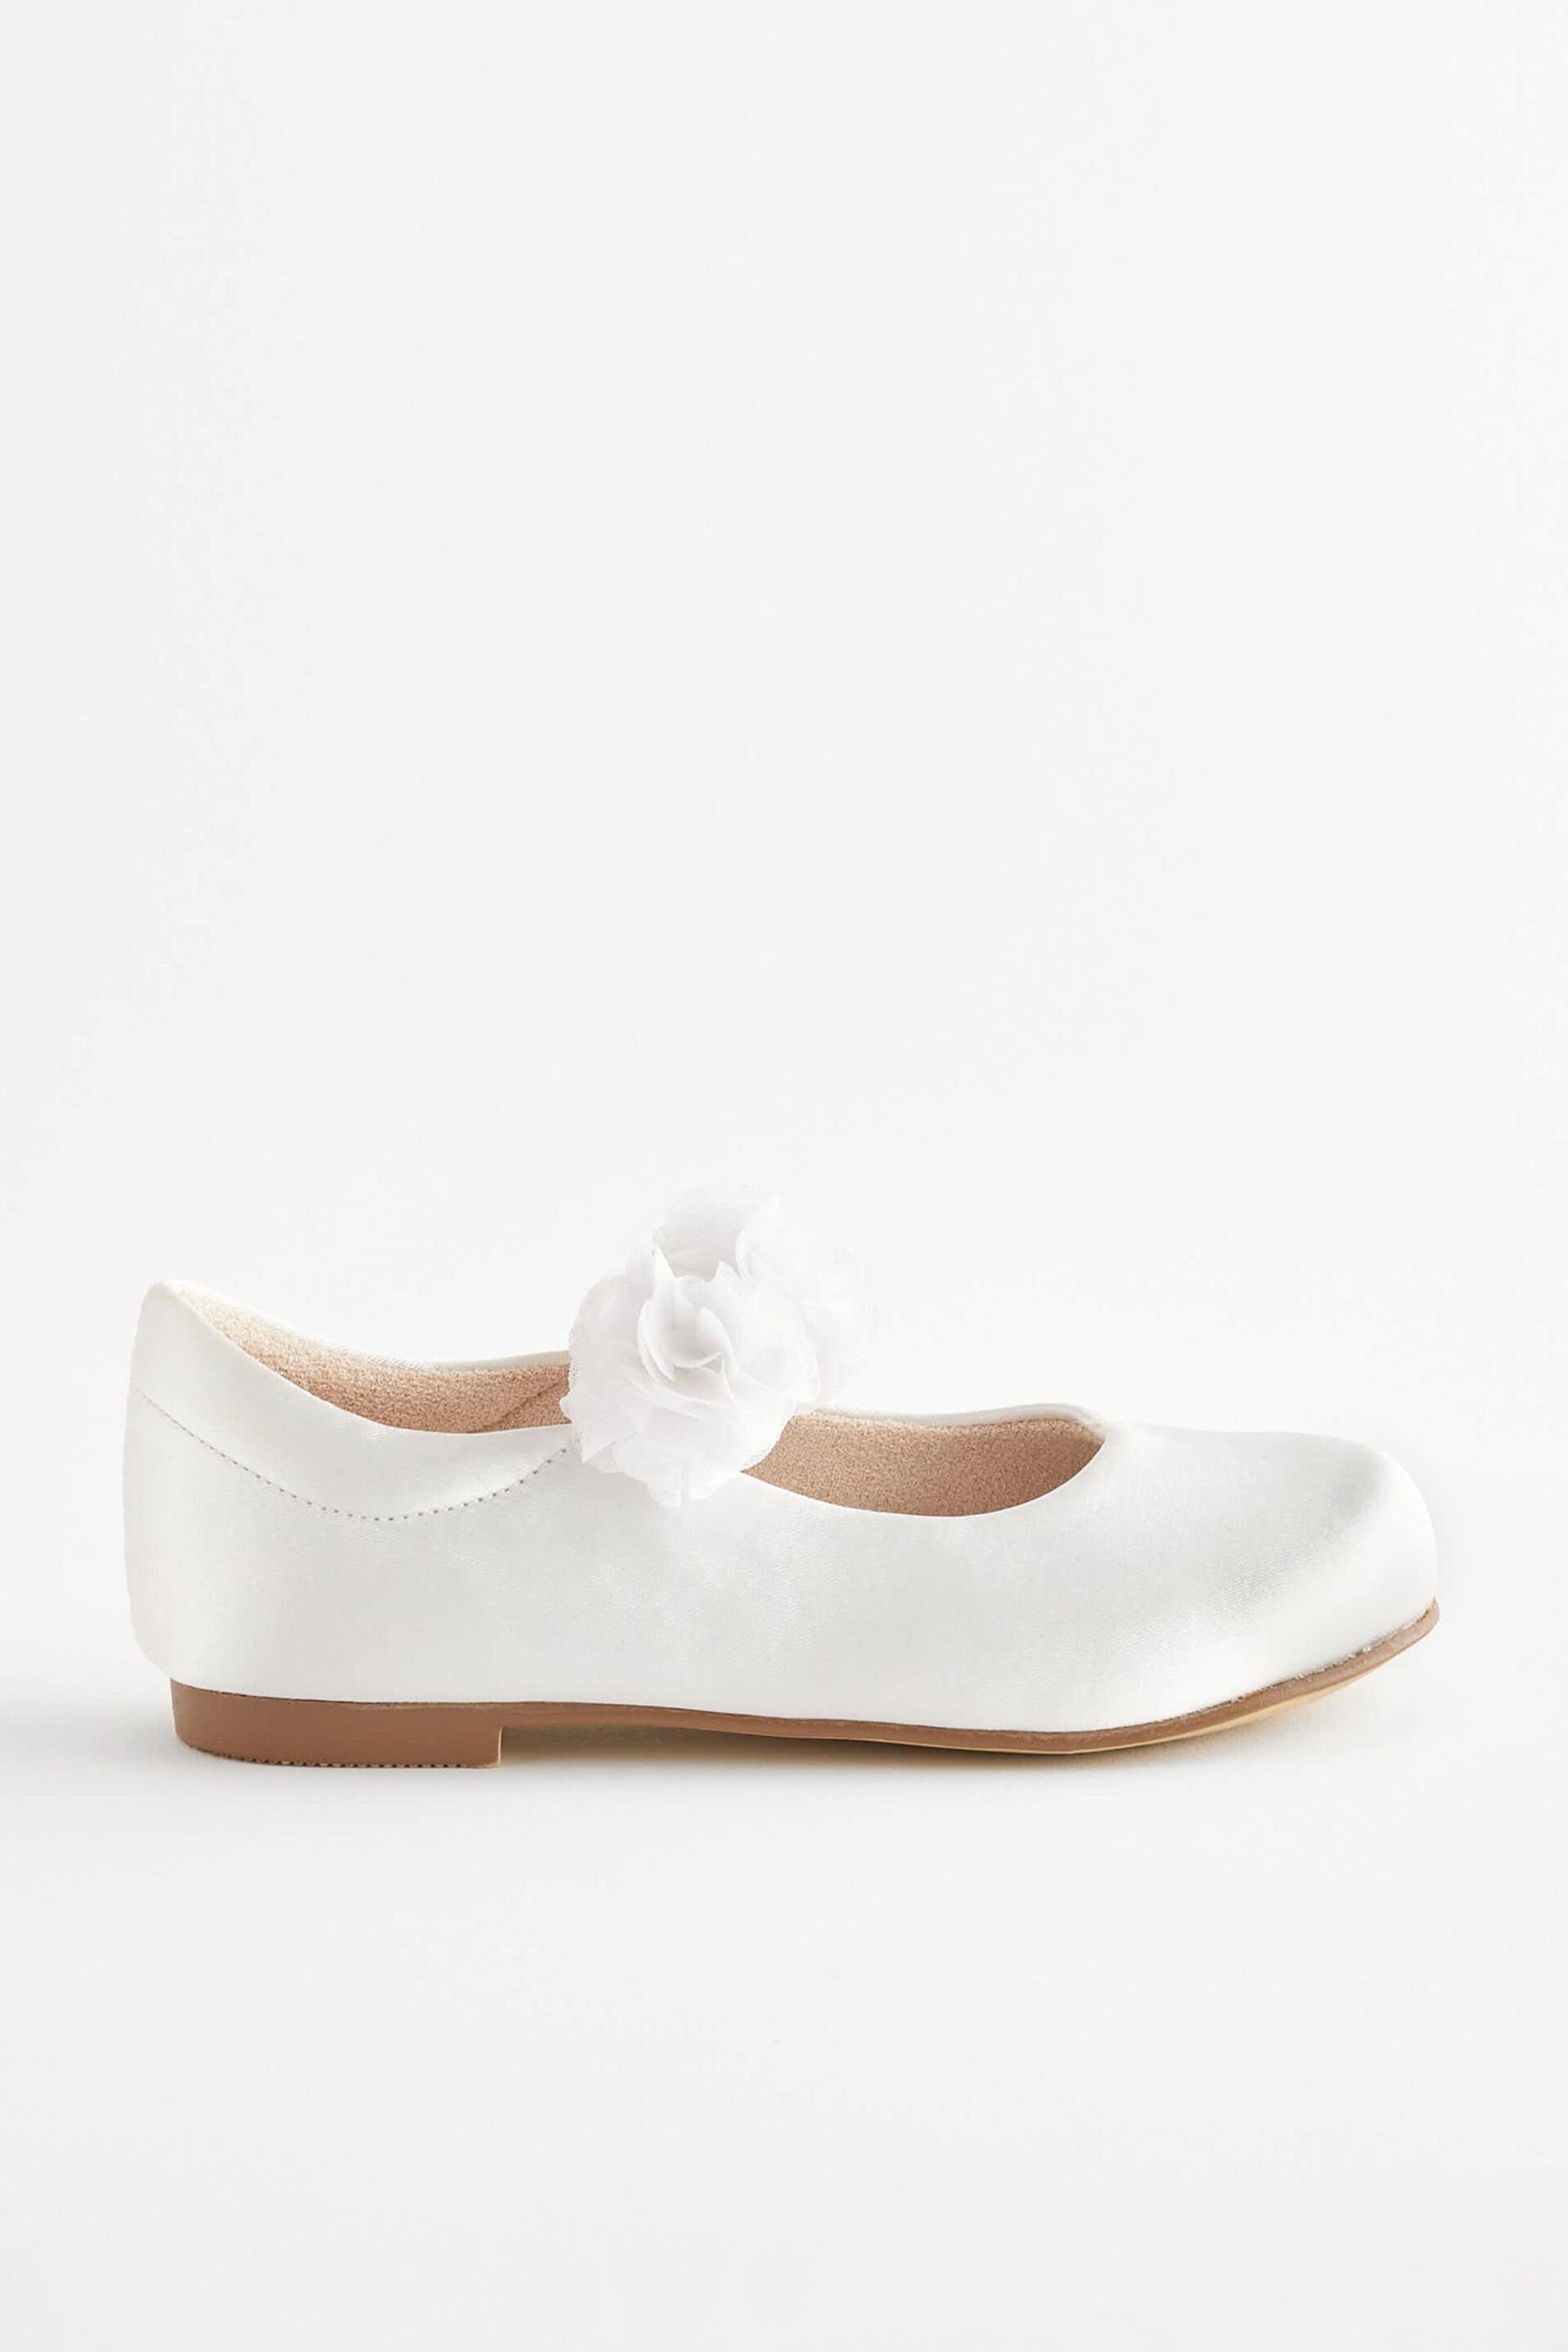 White Corsage Occasion Shoes - Image 2 of 5